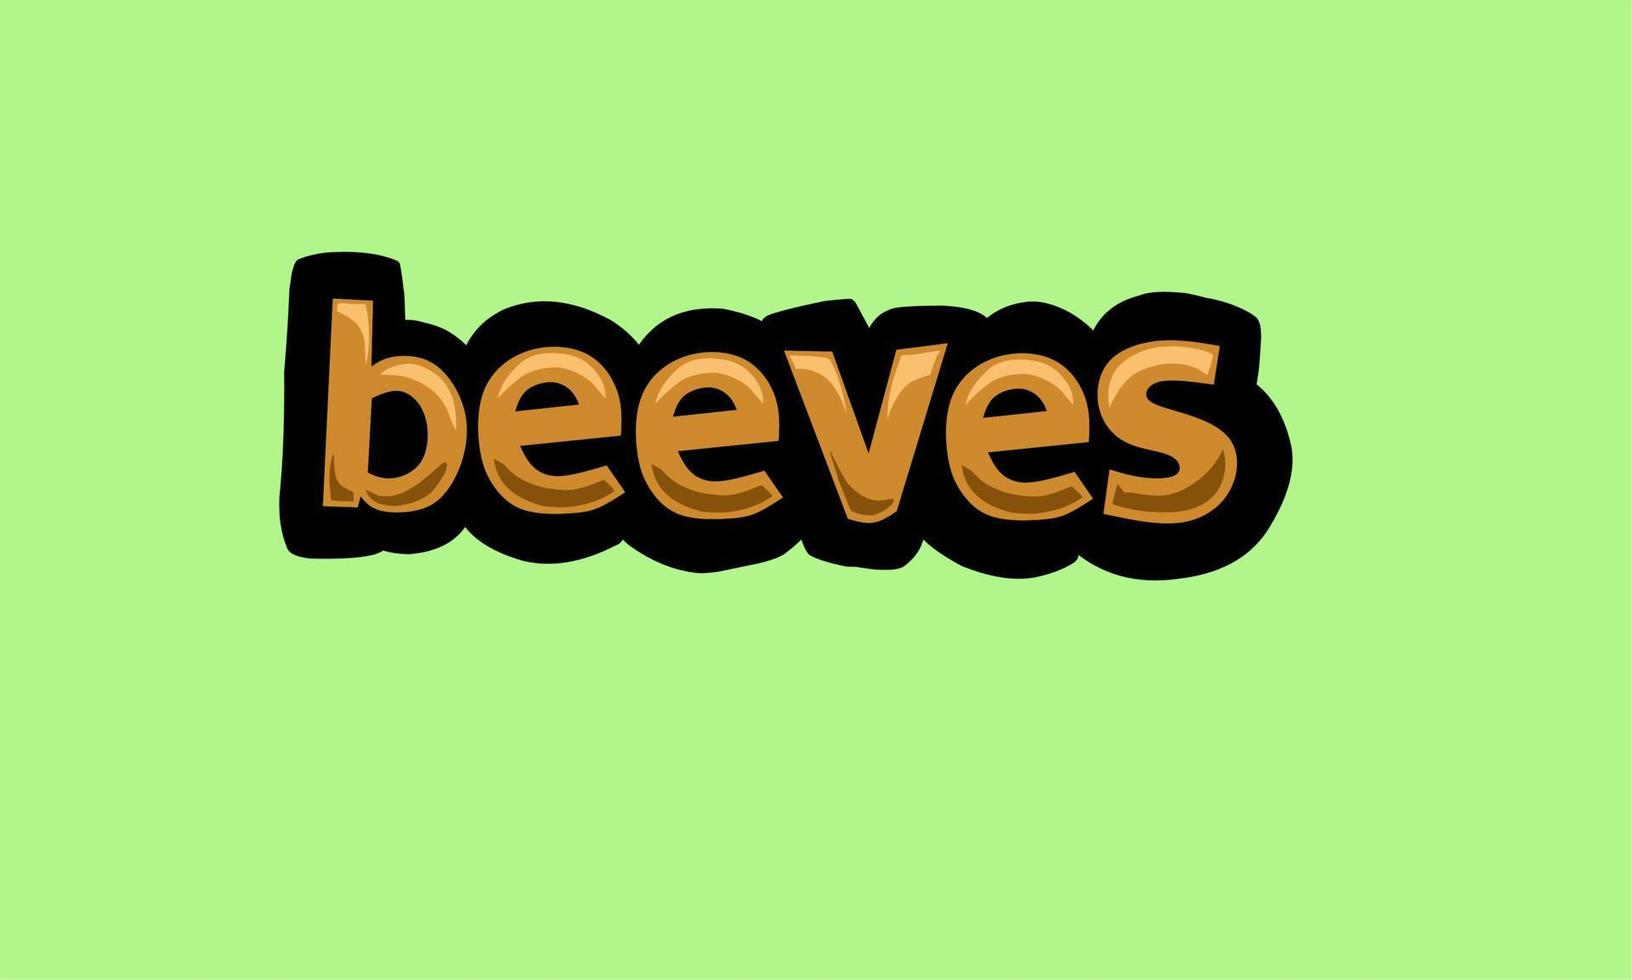 beeves writing vector design on a green background